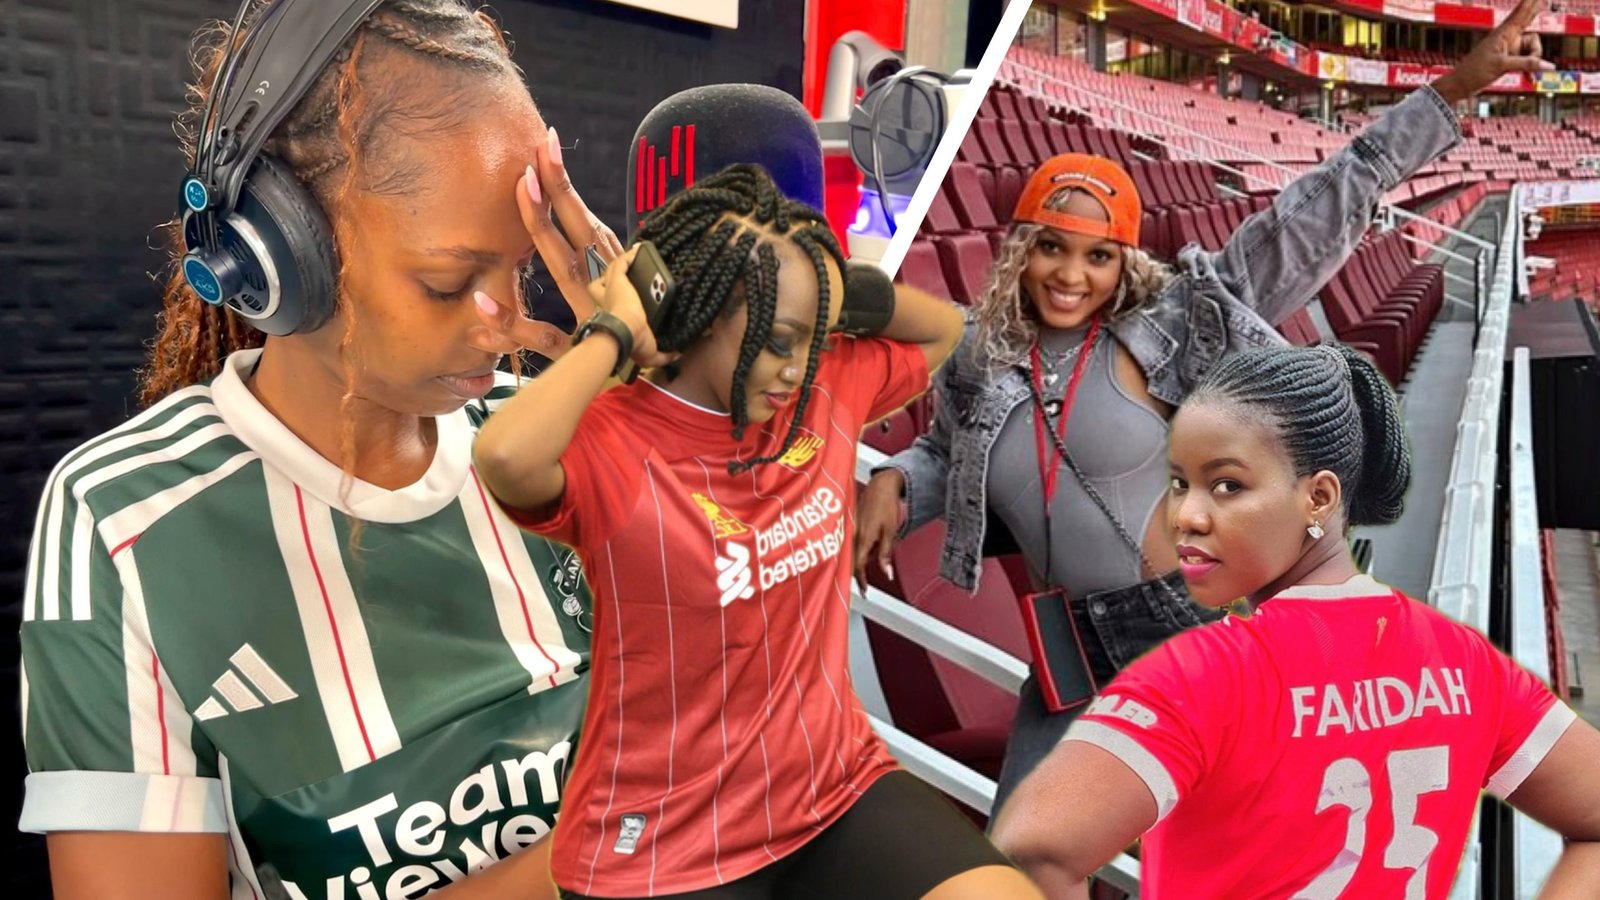 ugandan-female-celebrities-and-the-english-premier-league-football-clubs-they-support